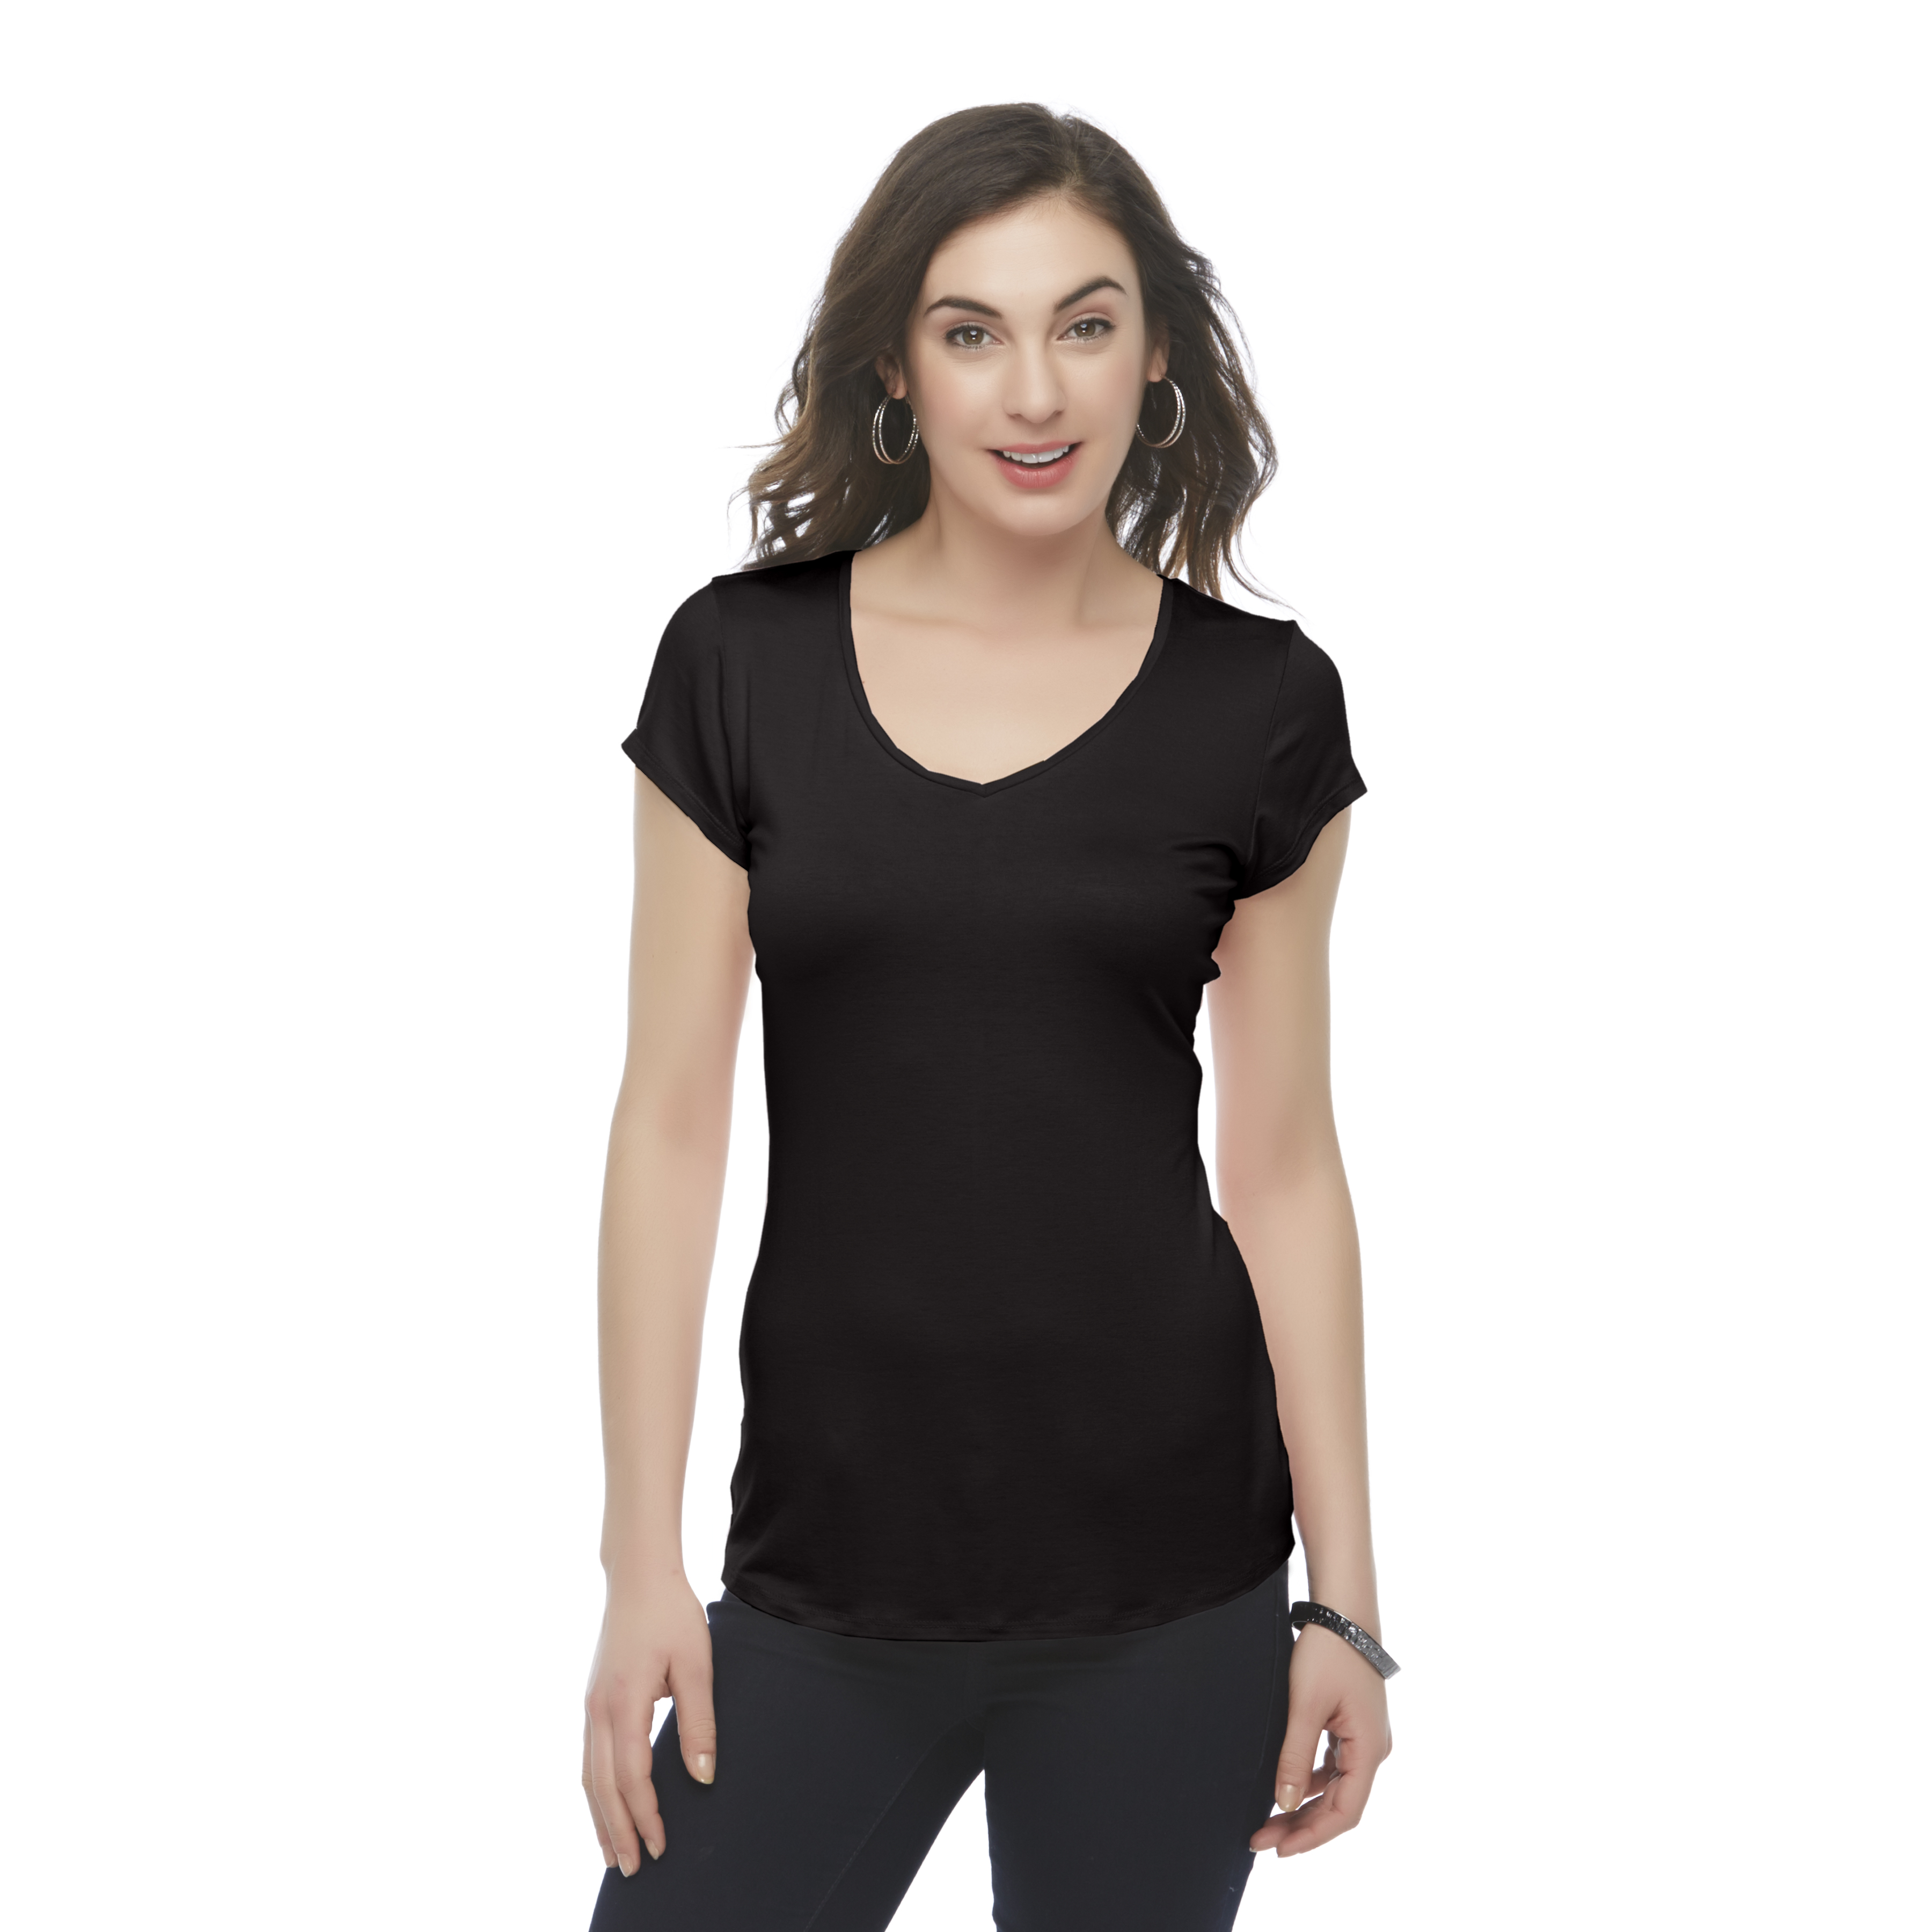 Attention Women's V-Neck Top